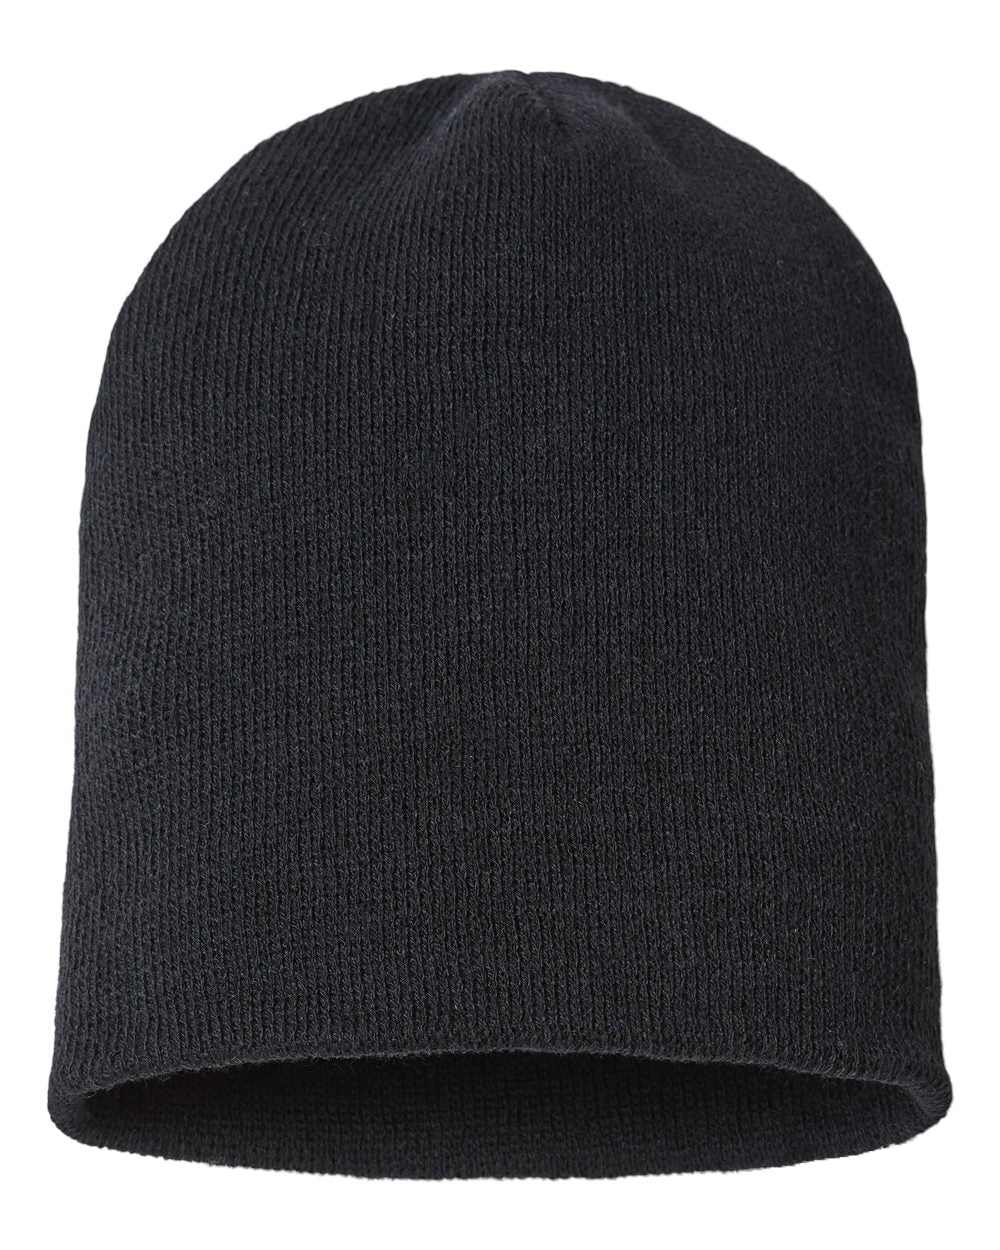 Recycled Made-in-USA Beanie